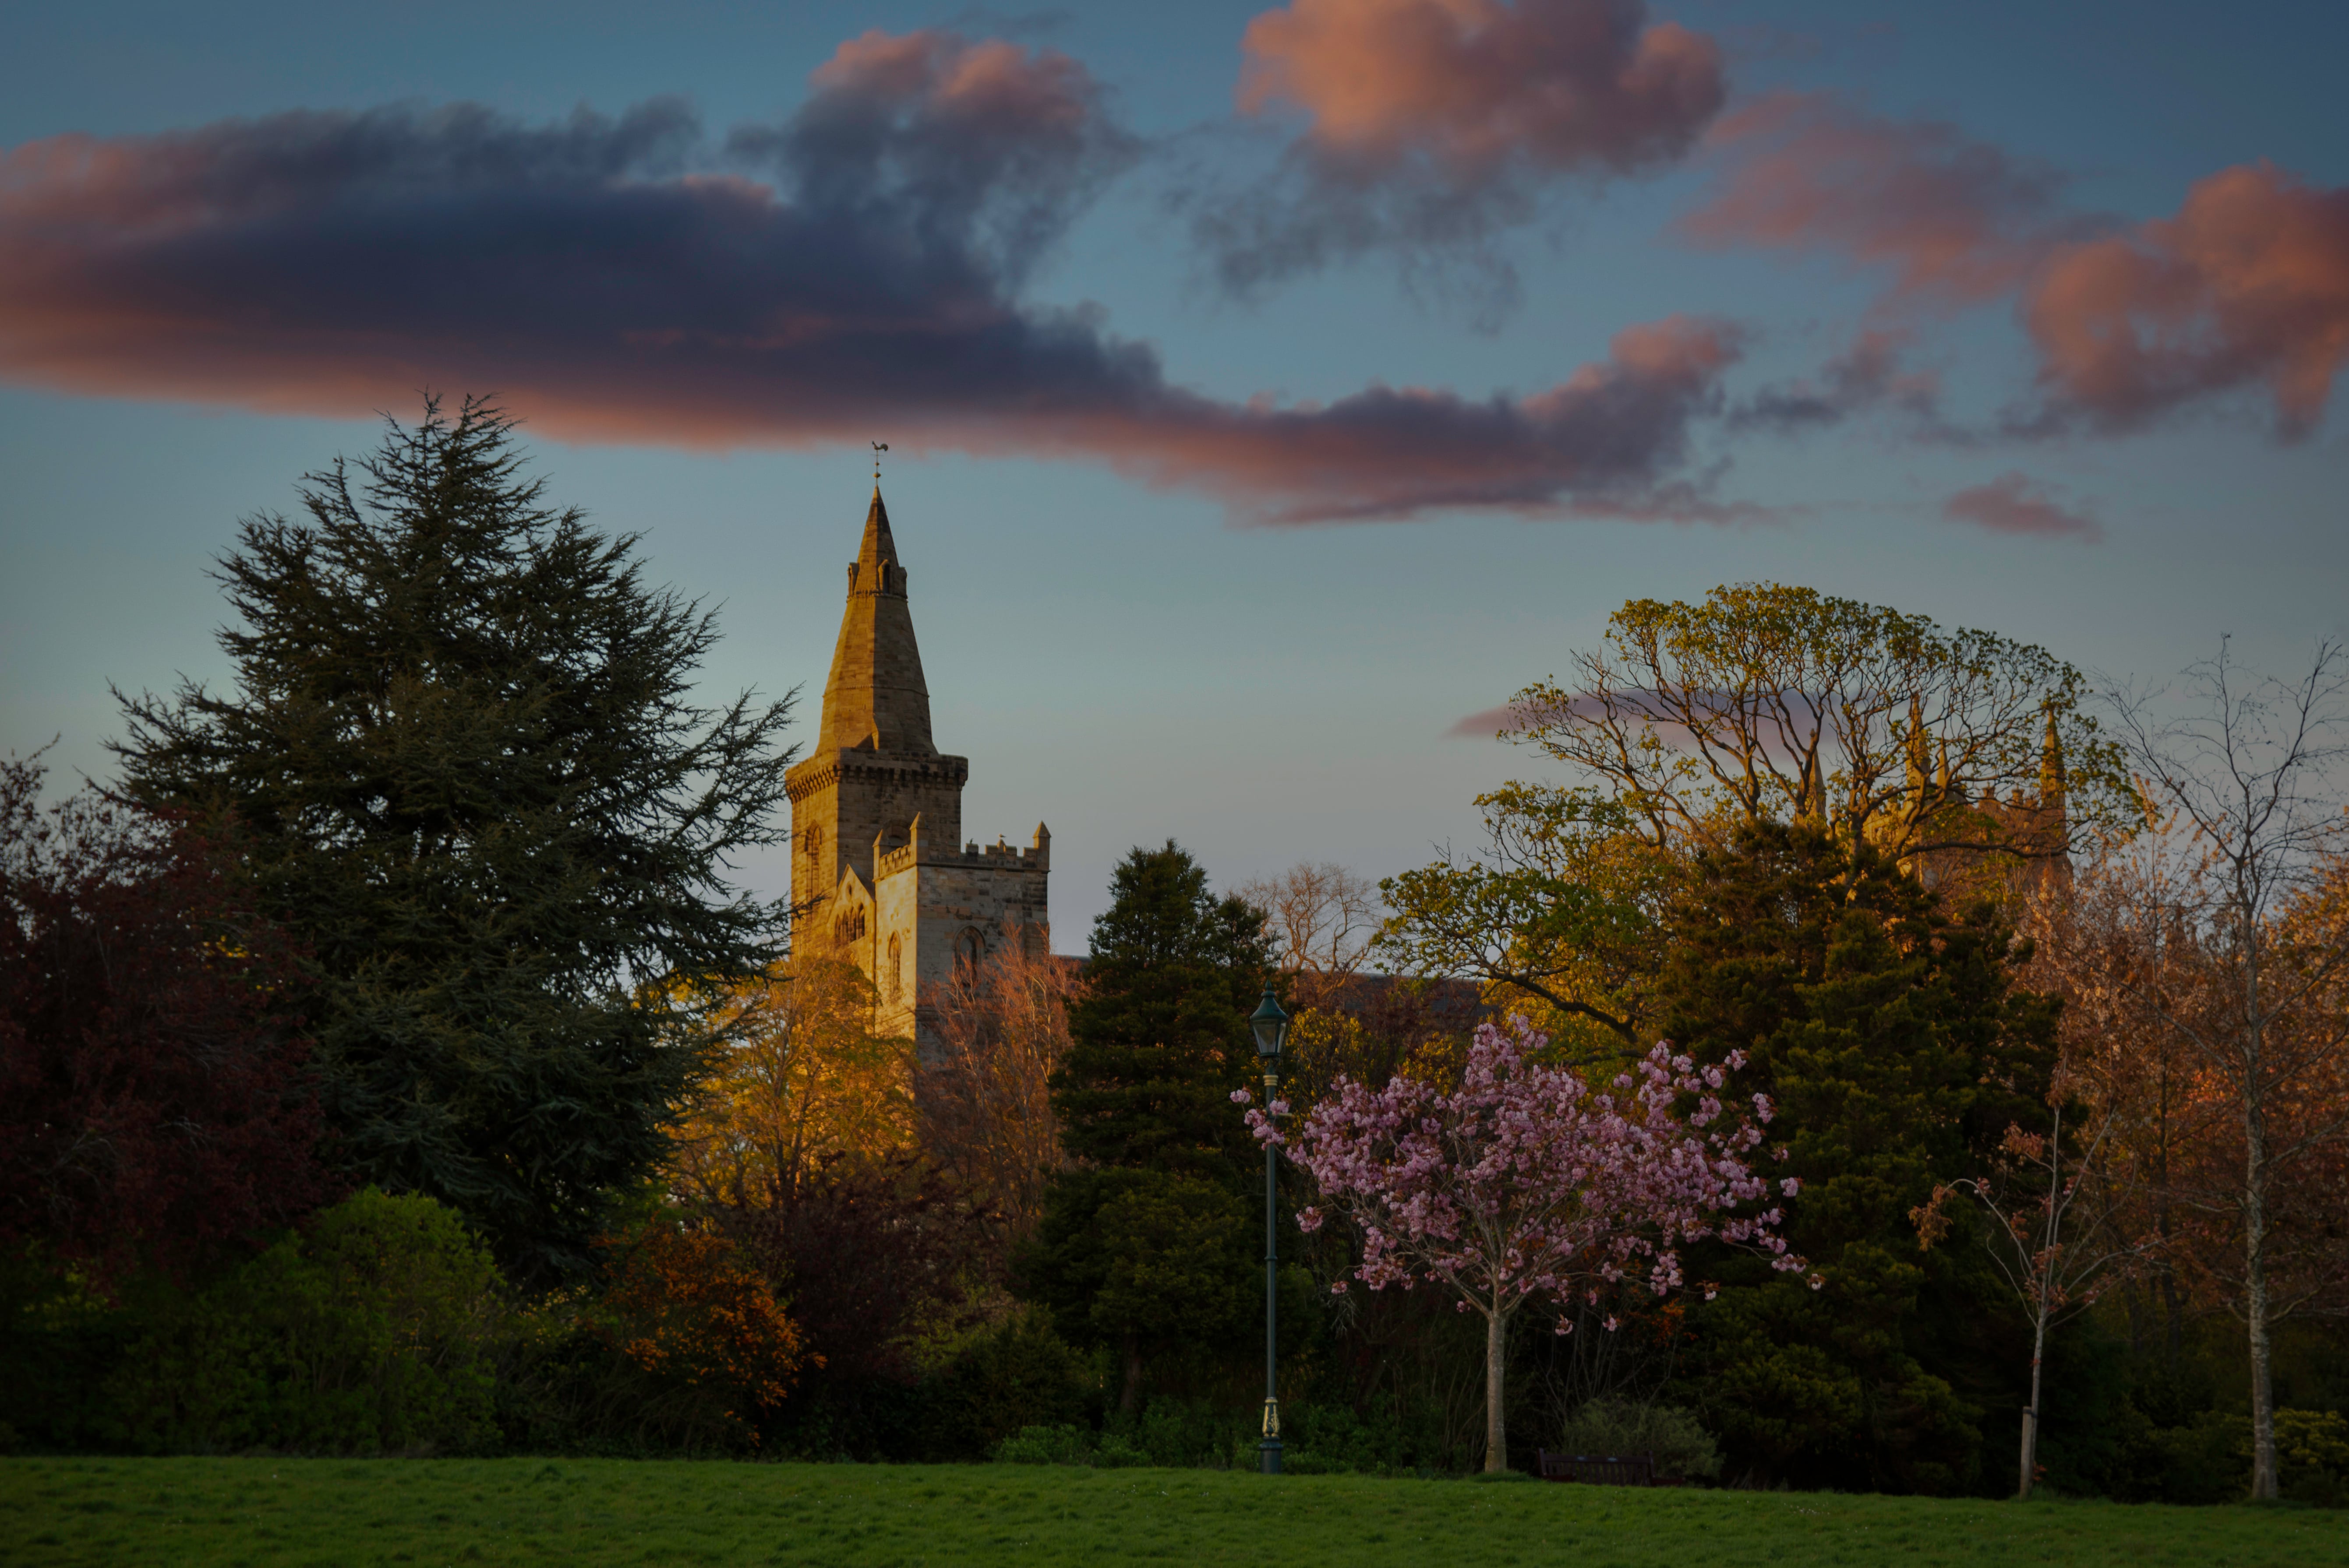 Sunset over church in Dunfermline